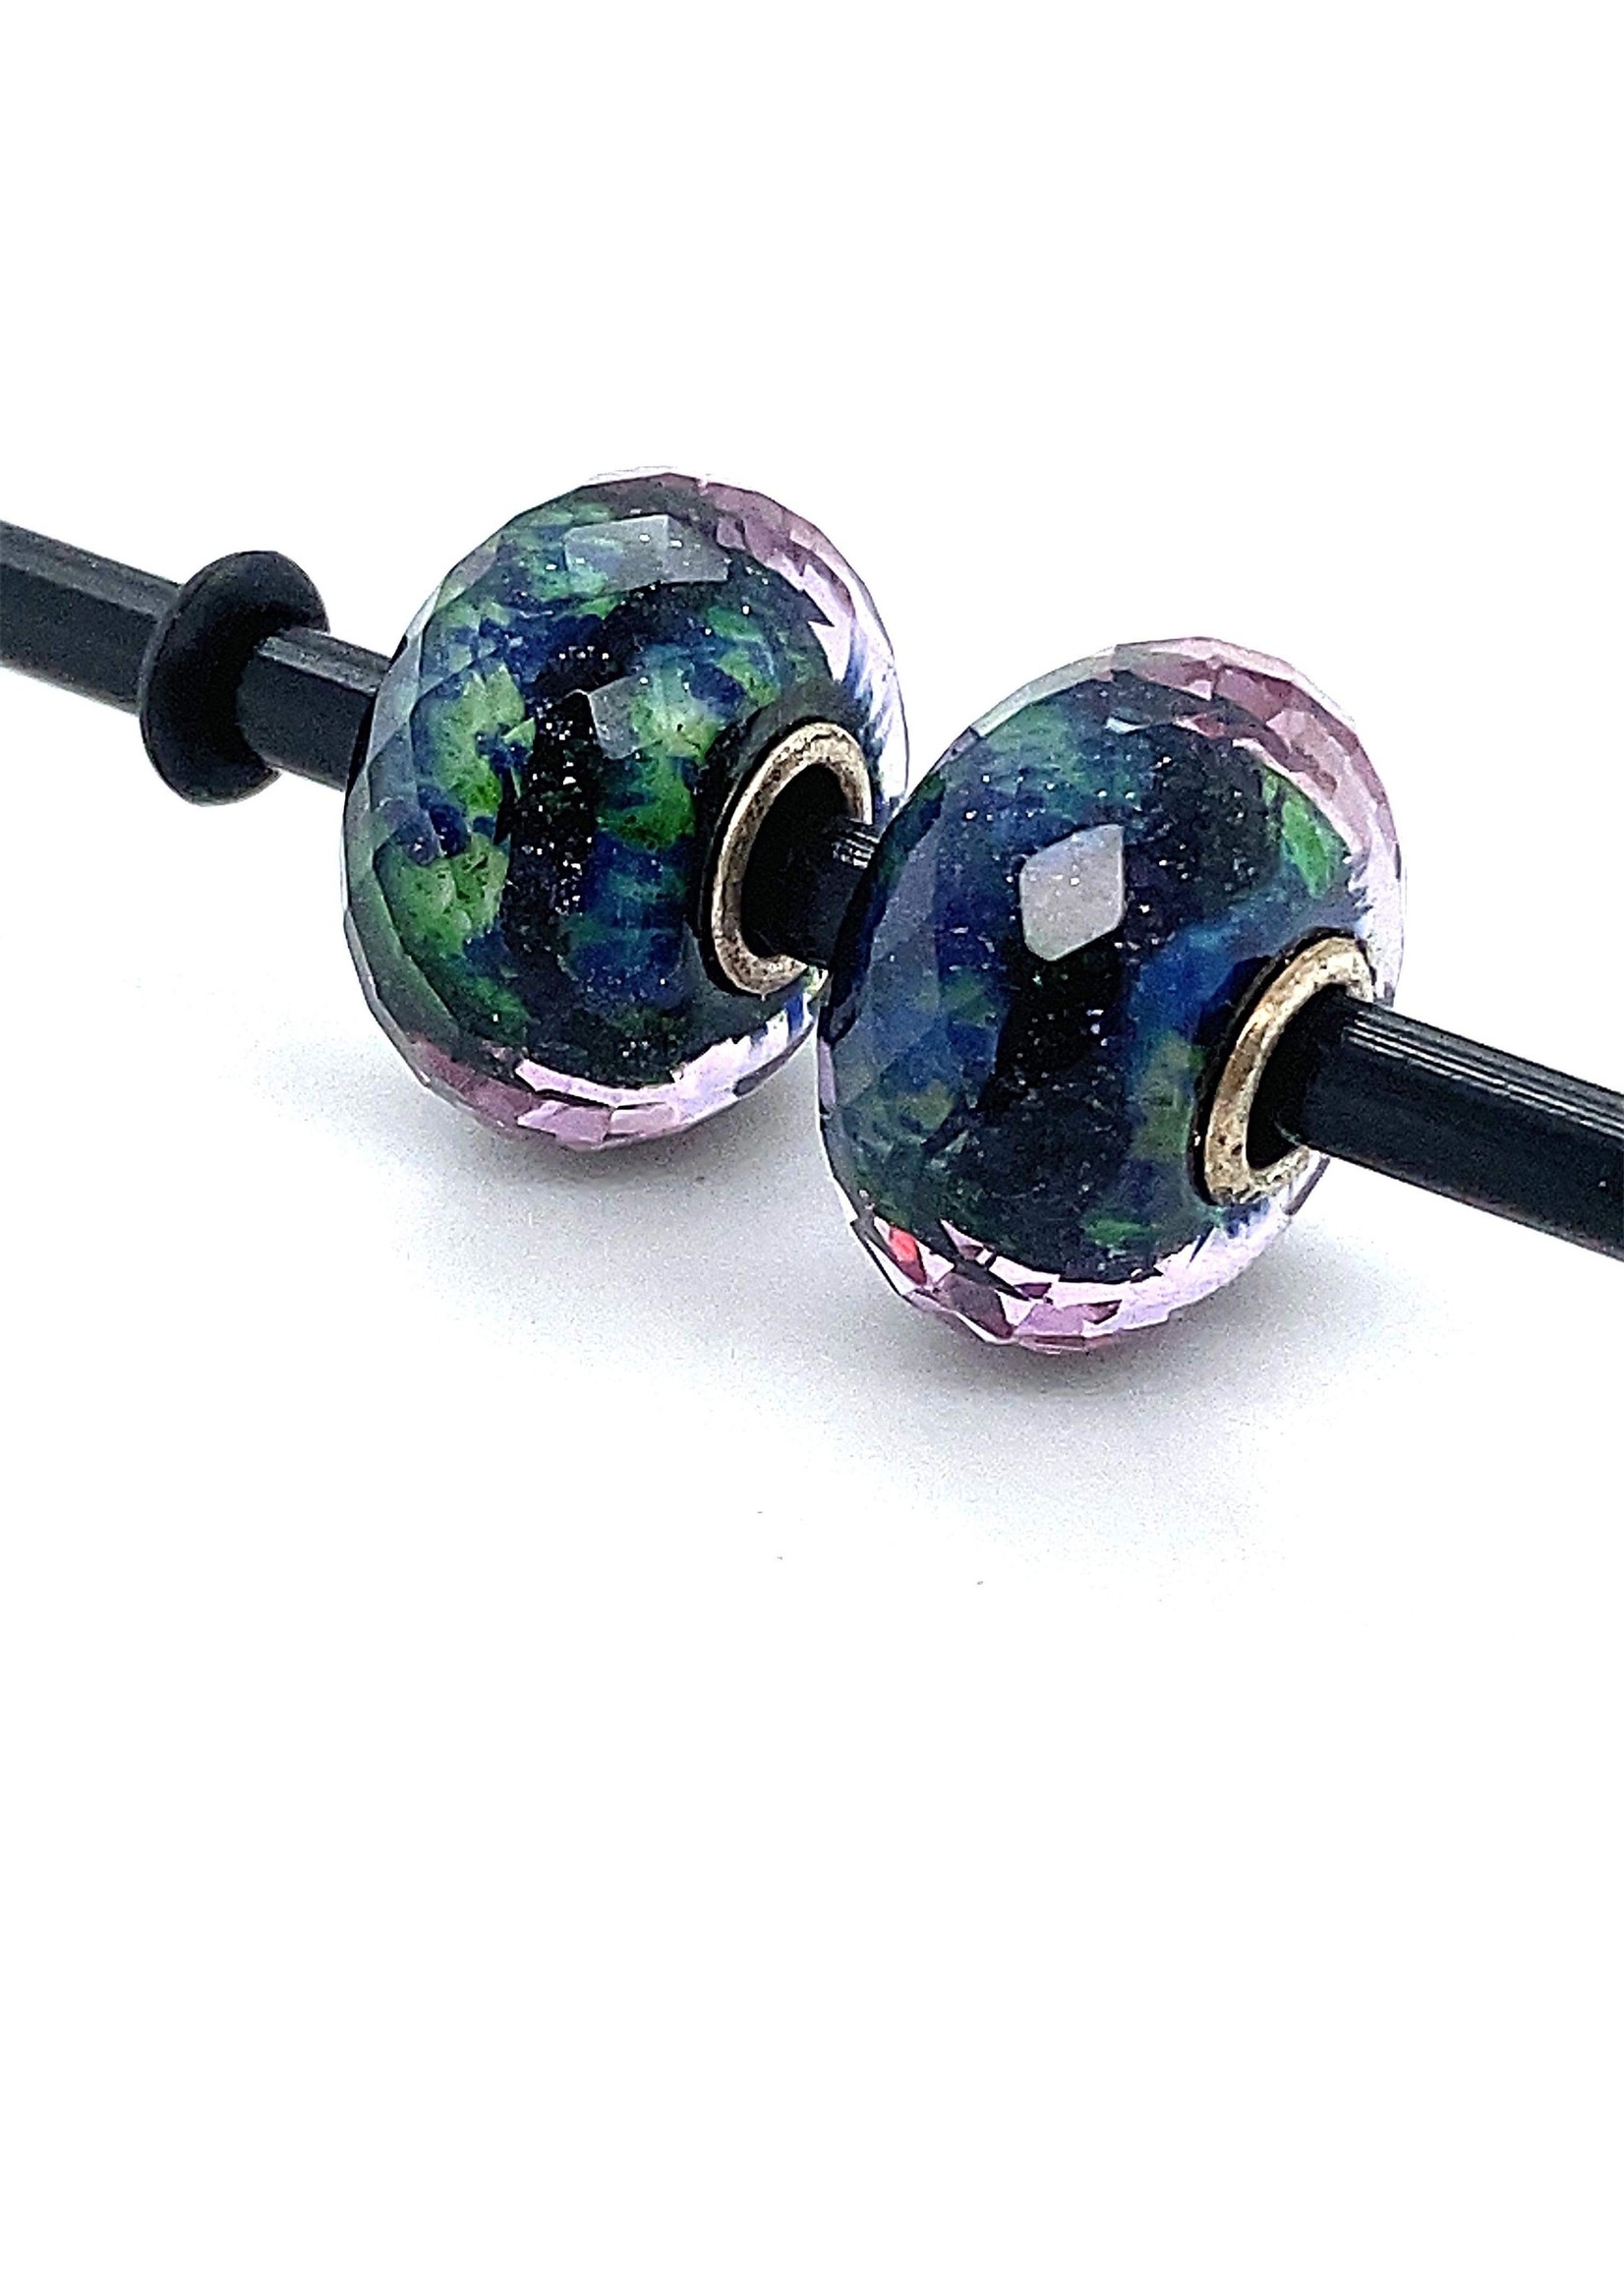 Vintage & Occasion trollbeads retired